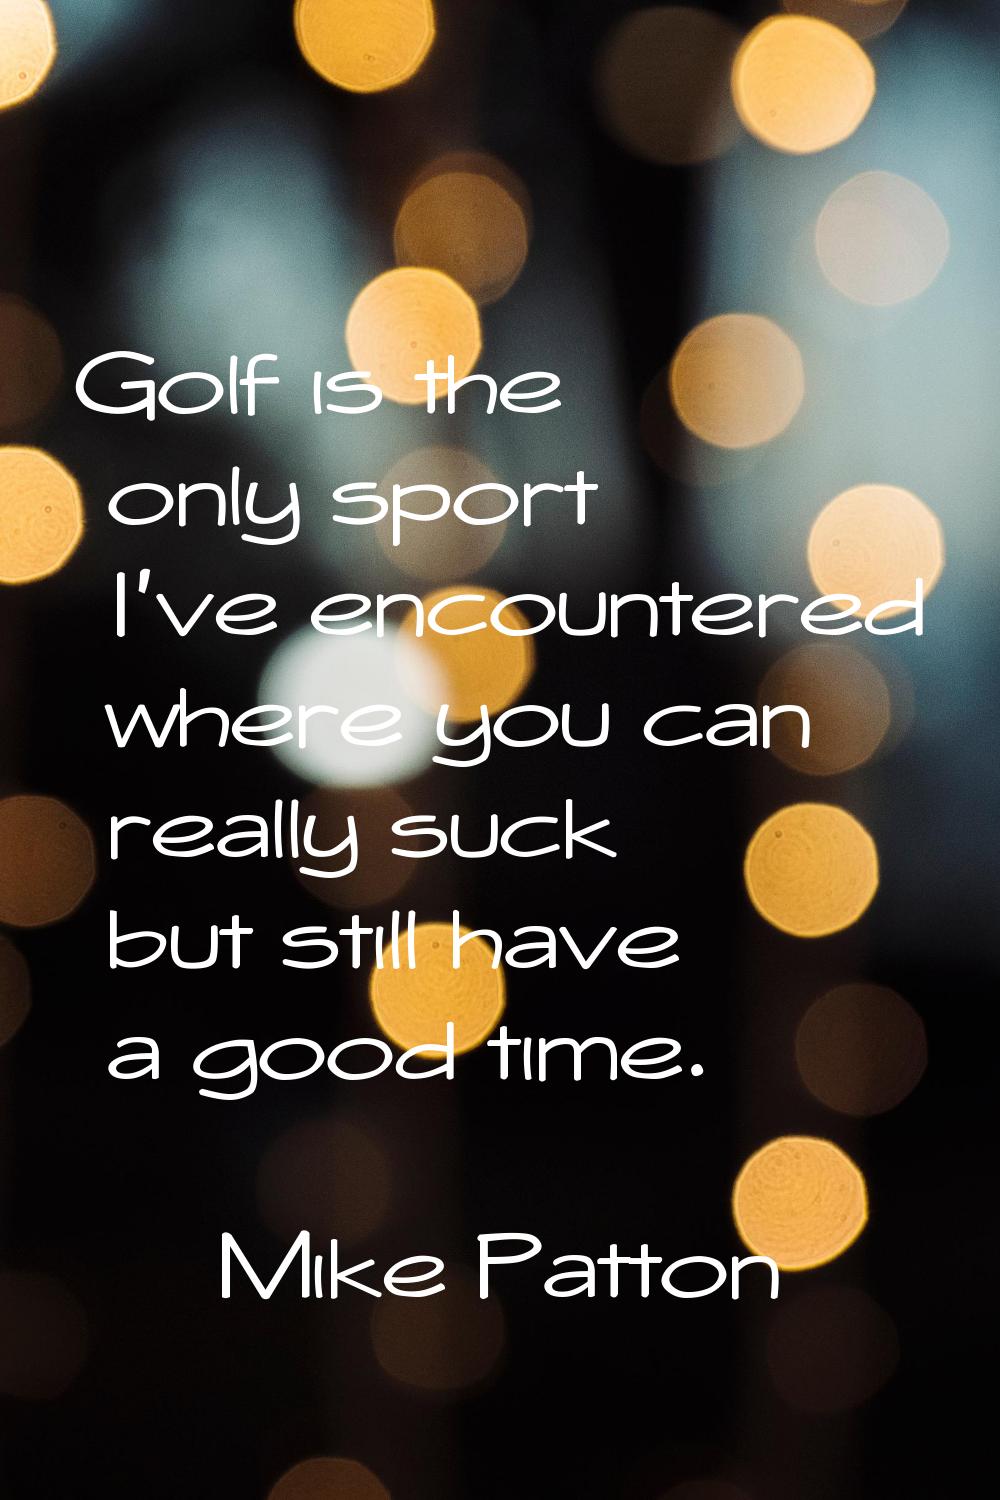 Golf is the only sport I've encountered where you can really suck but still have a good time.